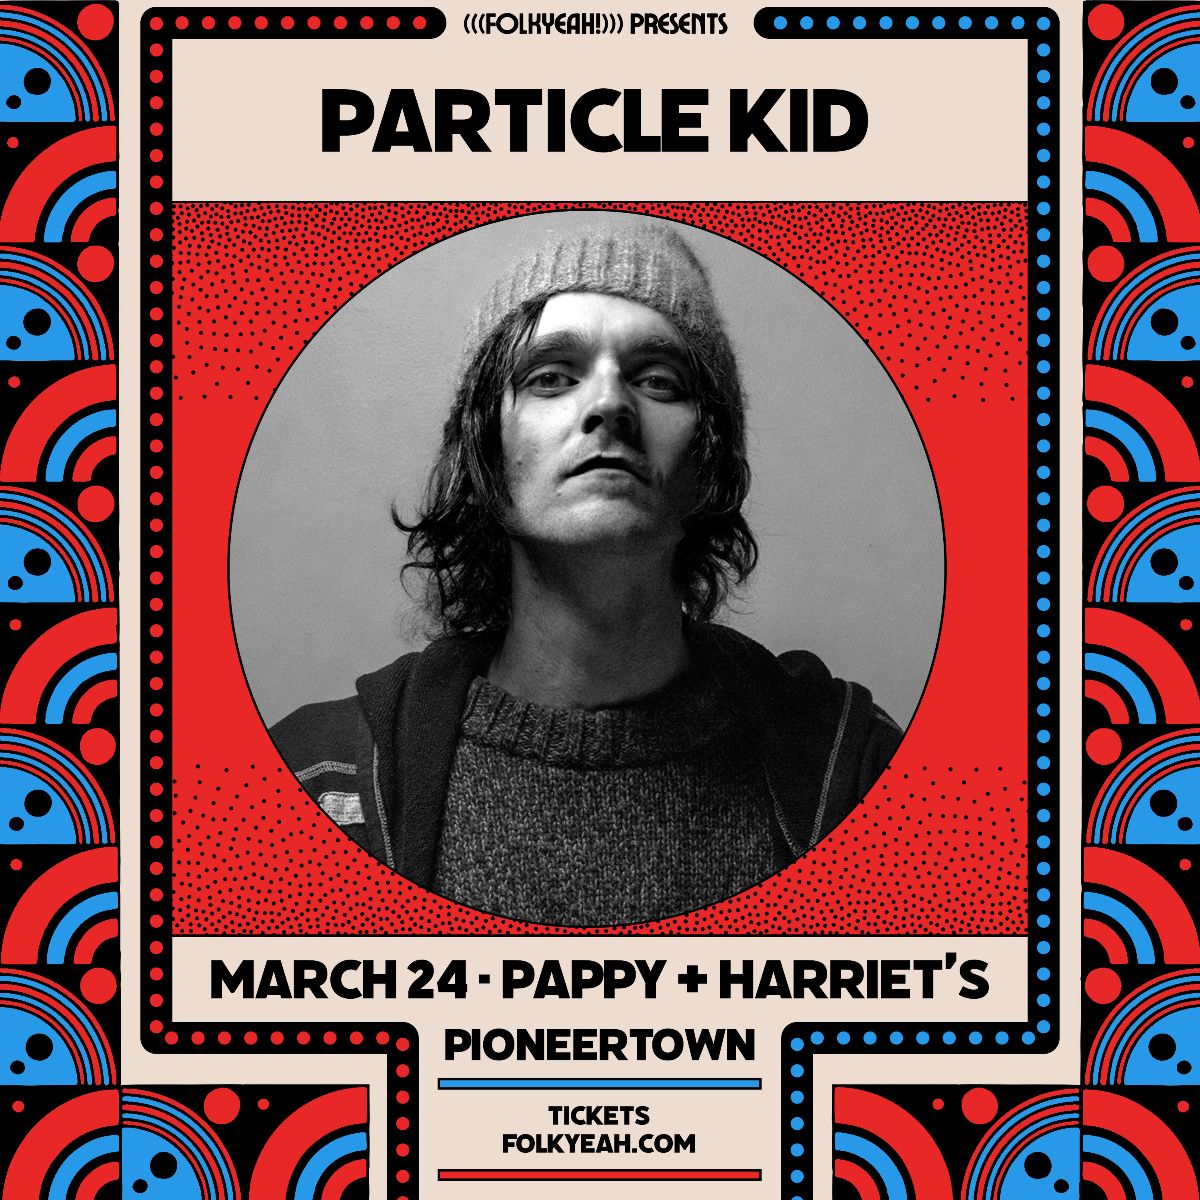 Just Announced! Tickets for Particle Kid (Micah Nelson & band) at Pappy + Harriet's in Pioneertown on Sunday, March 24 are on sale now! ☀️🌵 Get yours here: folkYEAH.com